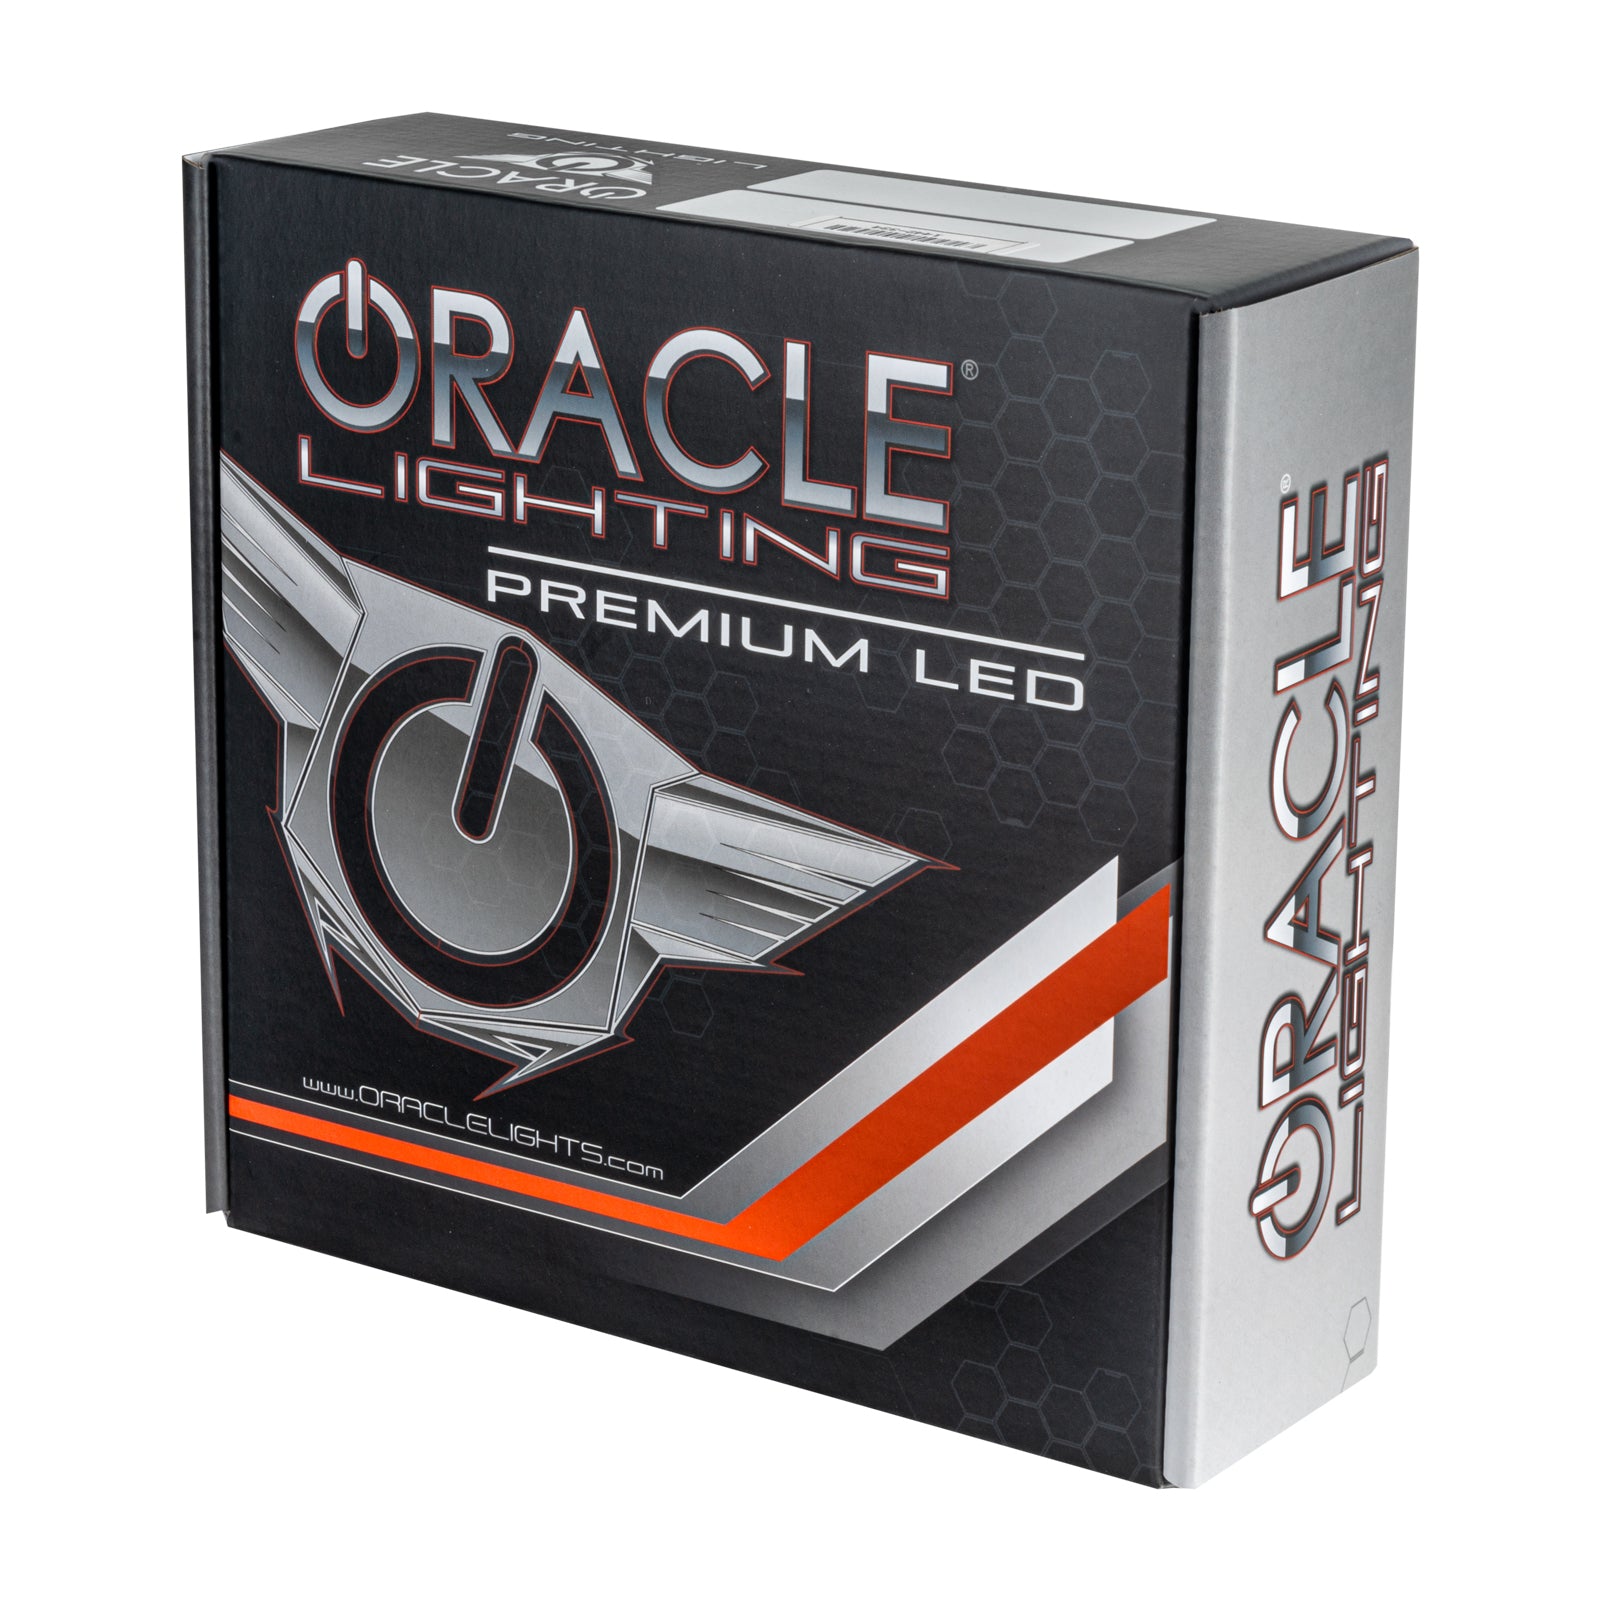 ORACLE Lighting 4 Pin 6' Extension Cable - ColorSHIFT Illuminated Wheel Rings